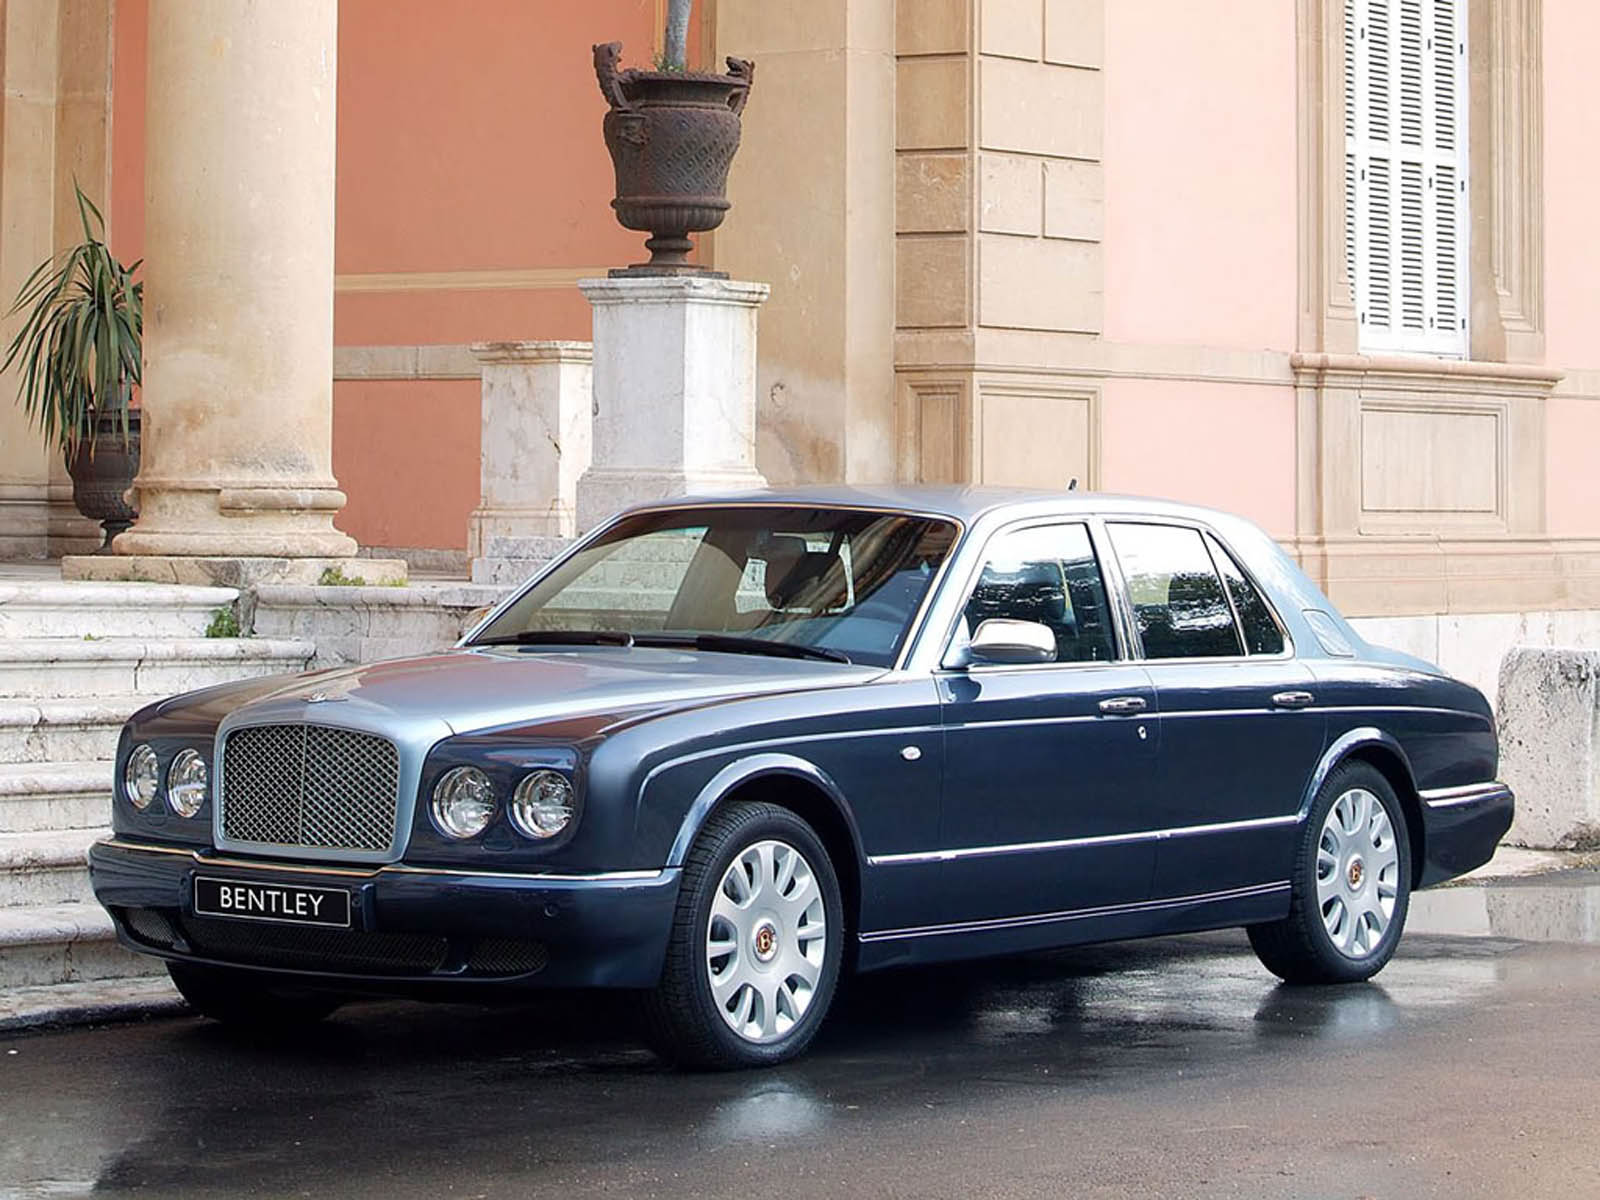 Tag: Bentley Arnage Car Wallpapers, Backgrounds, Paos, Images and 